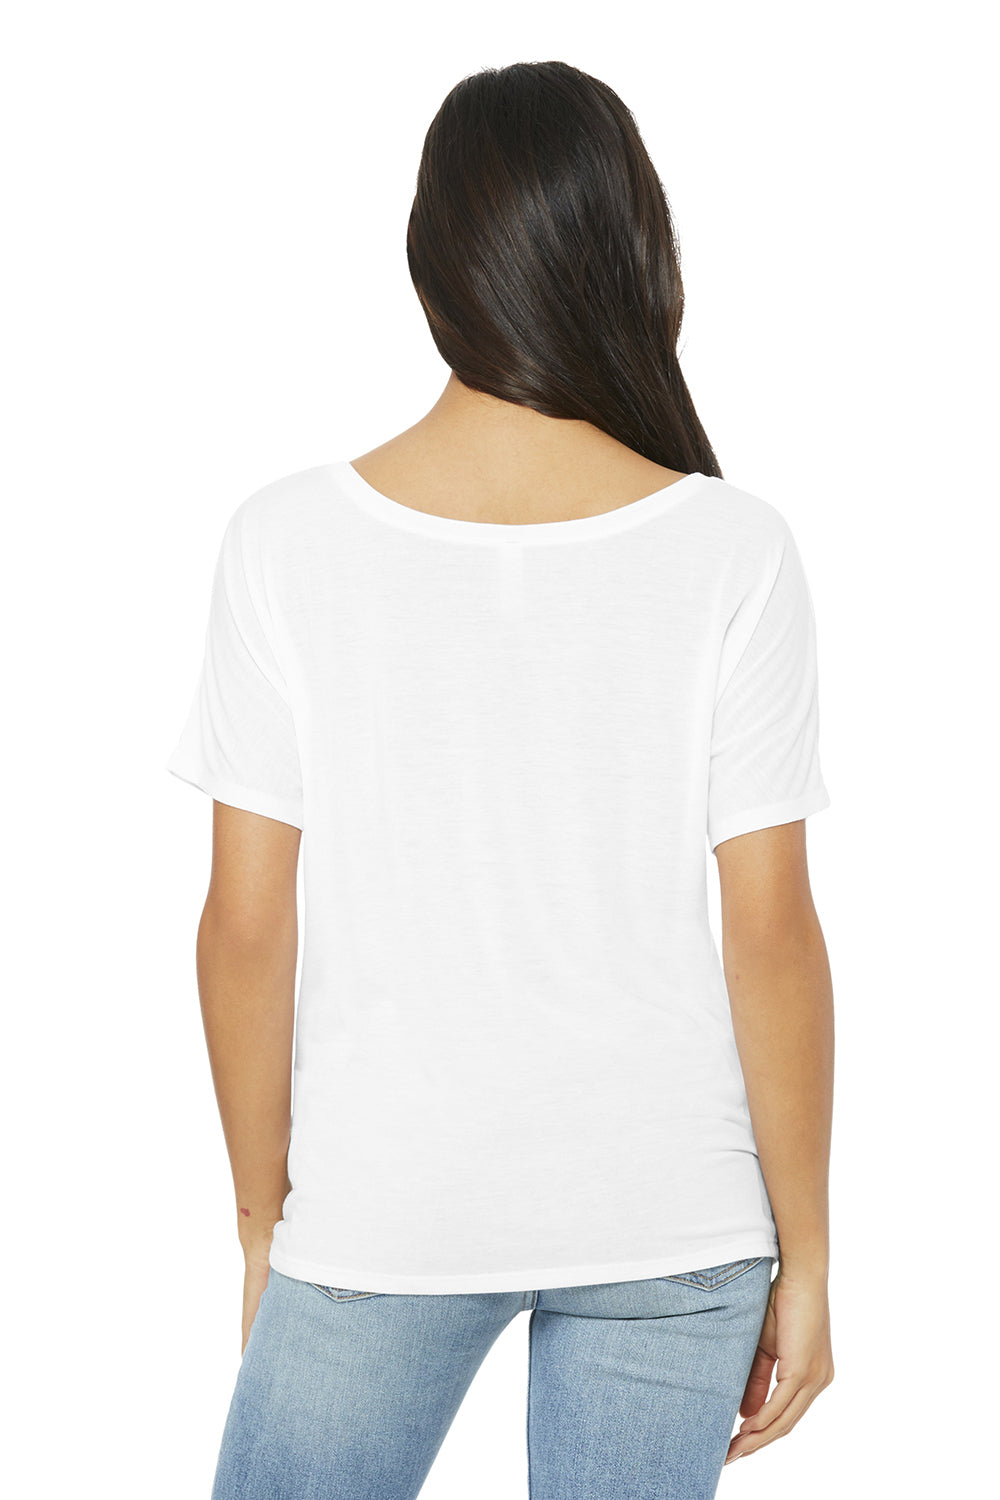 Bella + Canvas BC8816/8816 Womens Slouchy Short Sleeve Wide Neck T-Shirt White Model Back